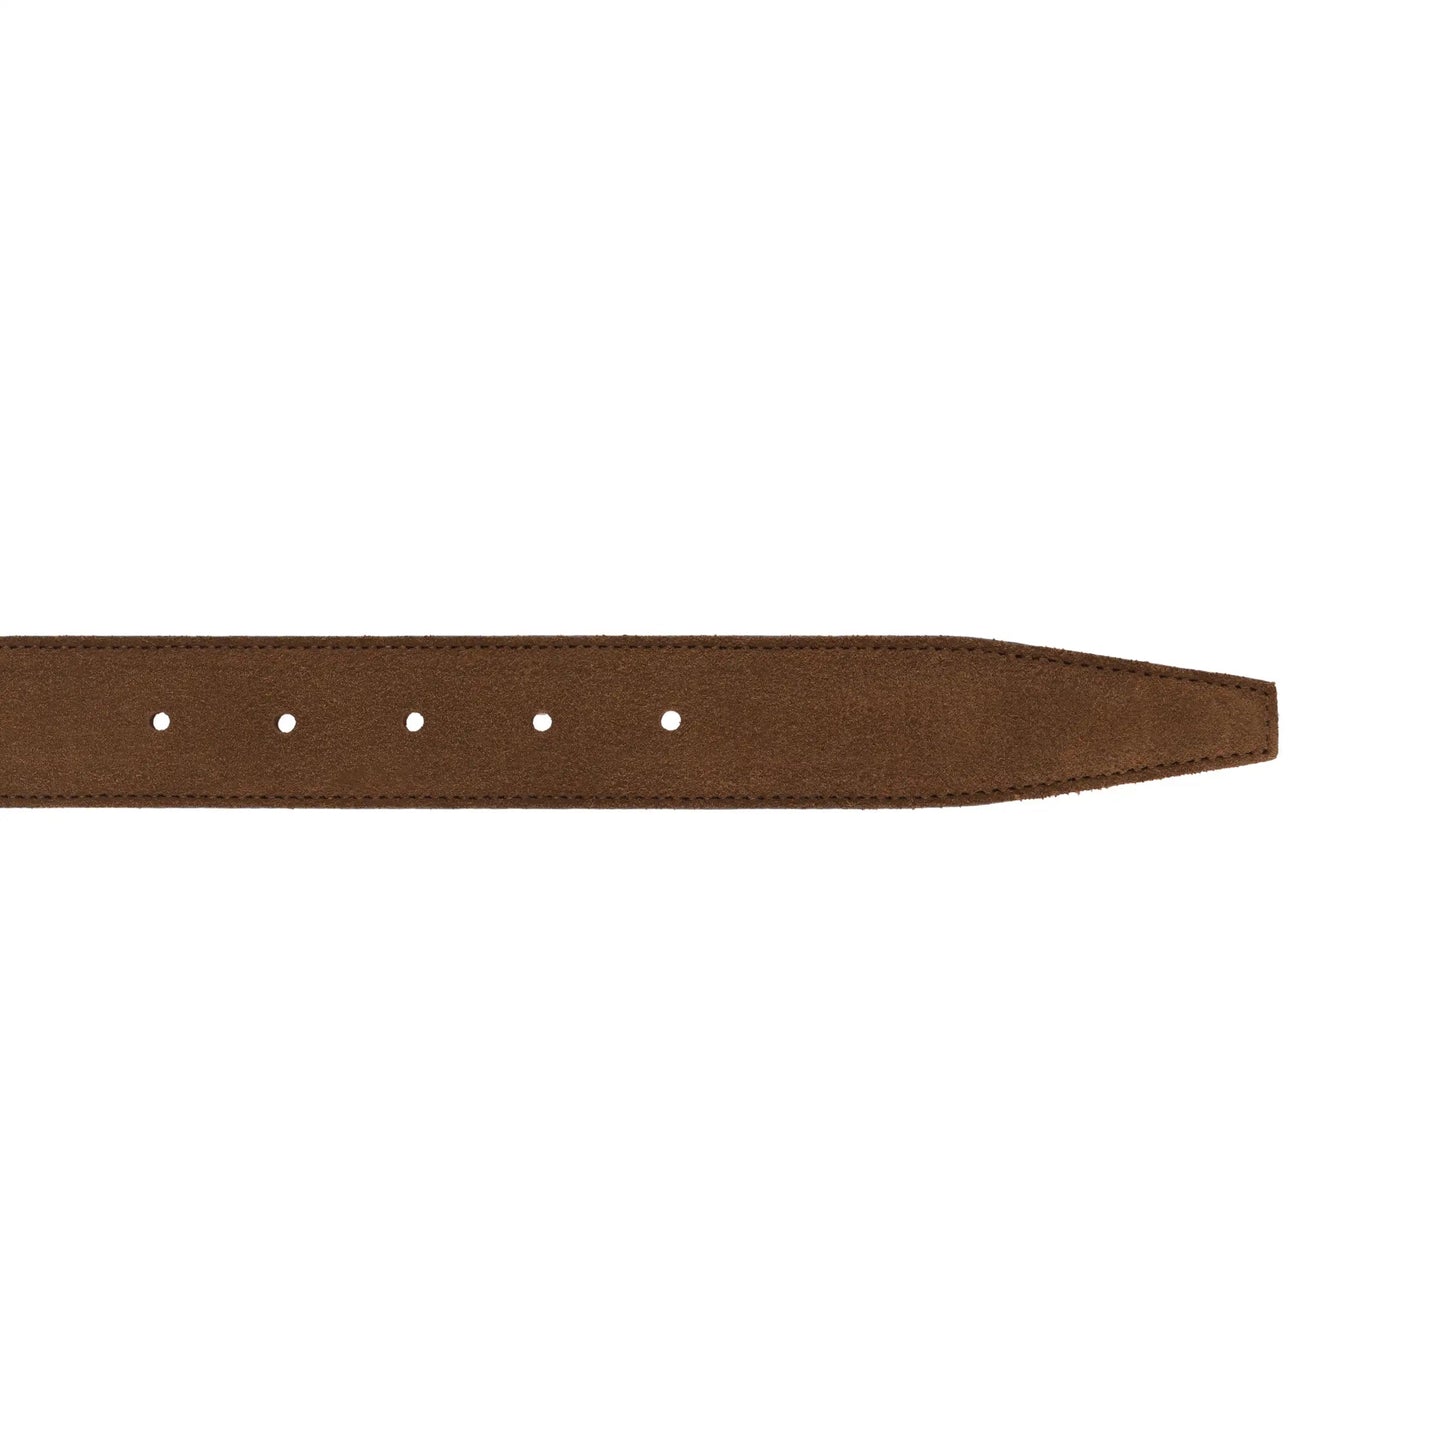 D’amico Suede Leather Belt in Brown - SARTALE